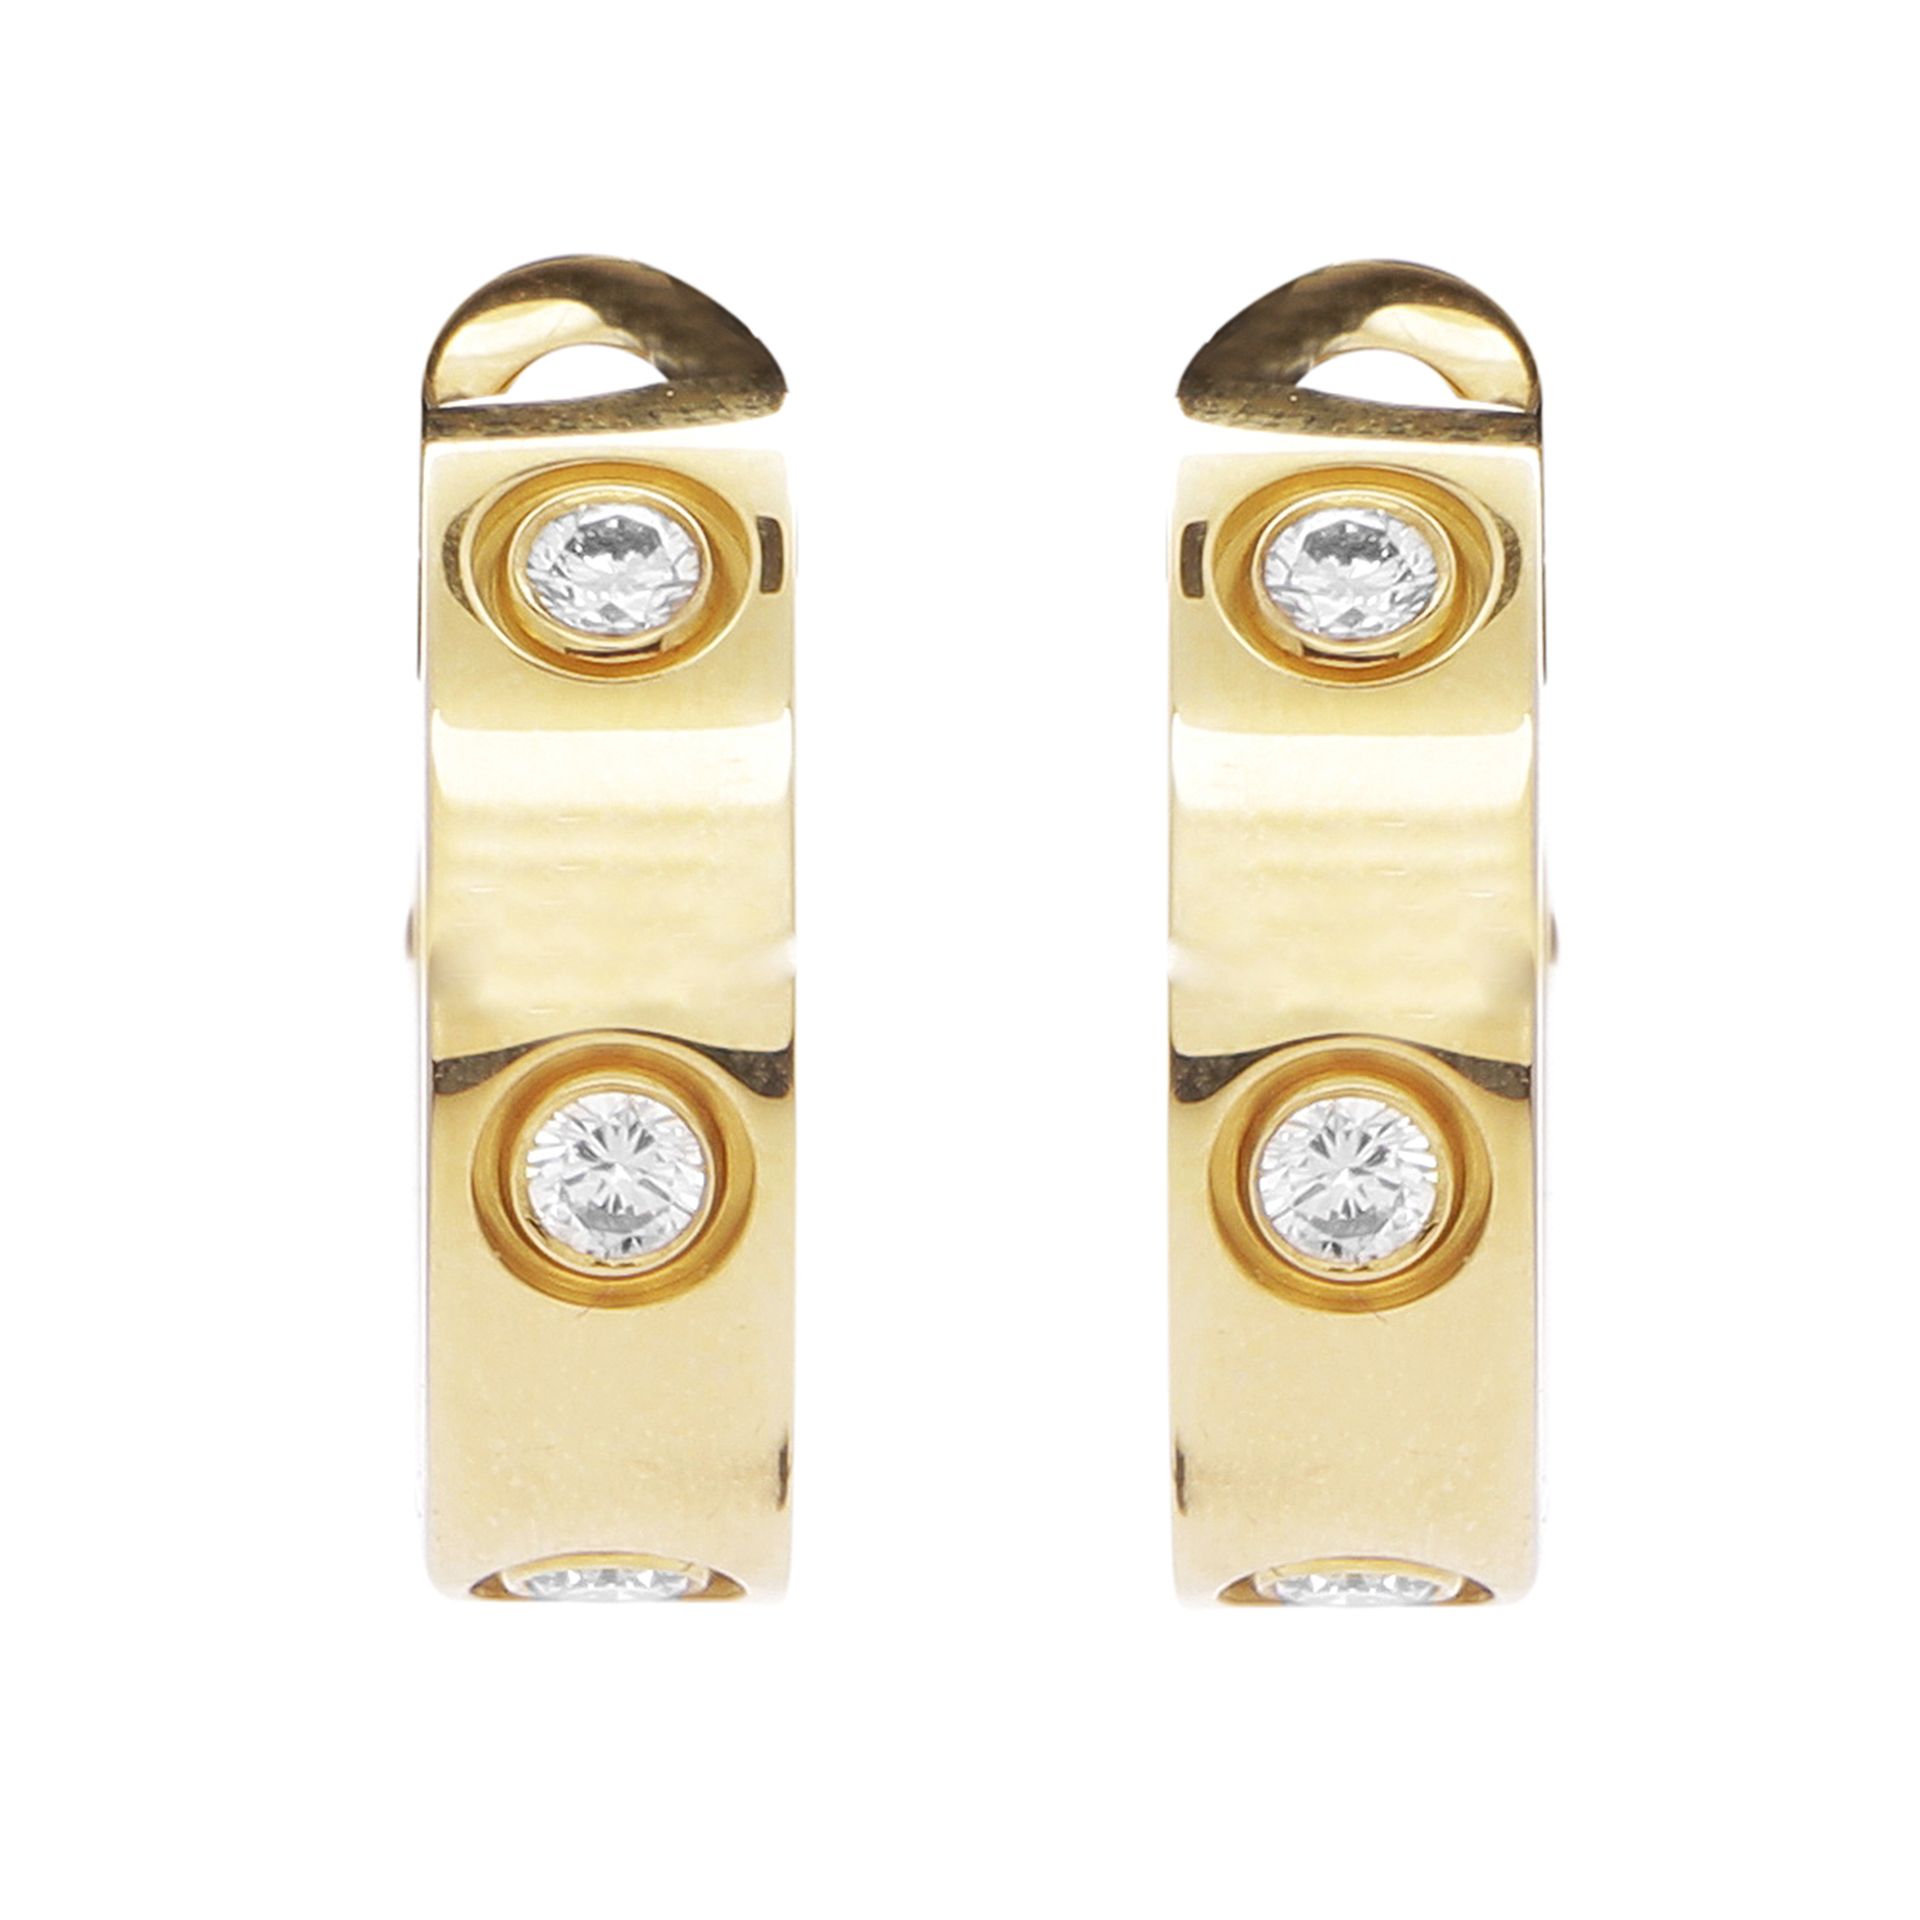 A PAIR DIAMOND LOVE EARRINGS, CARTIER in 18ct gold each jewelled with three round cut diamond, box